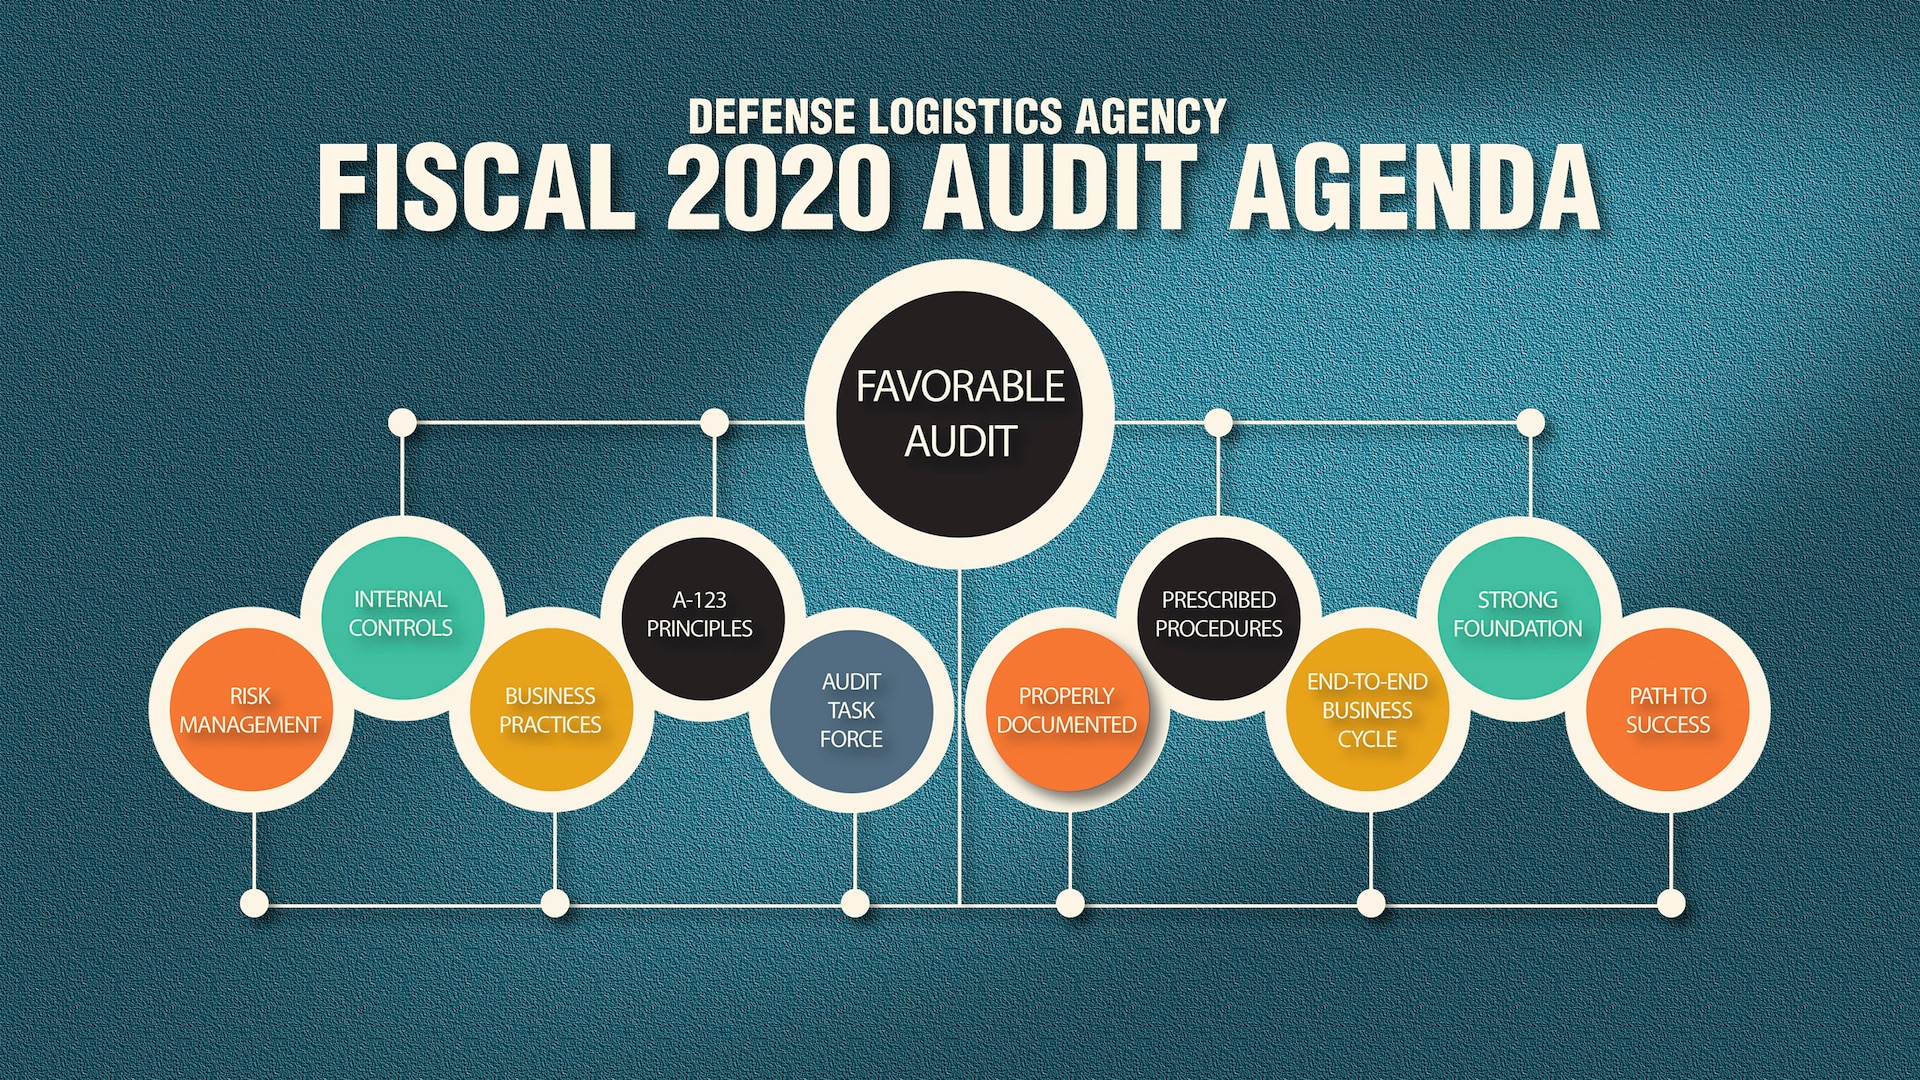 A new organizational structure and stronger focus on enterprise risk management and internal controls are expected to guide the Defense Logistics Agency’s fiscal 2020 audit efforts.